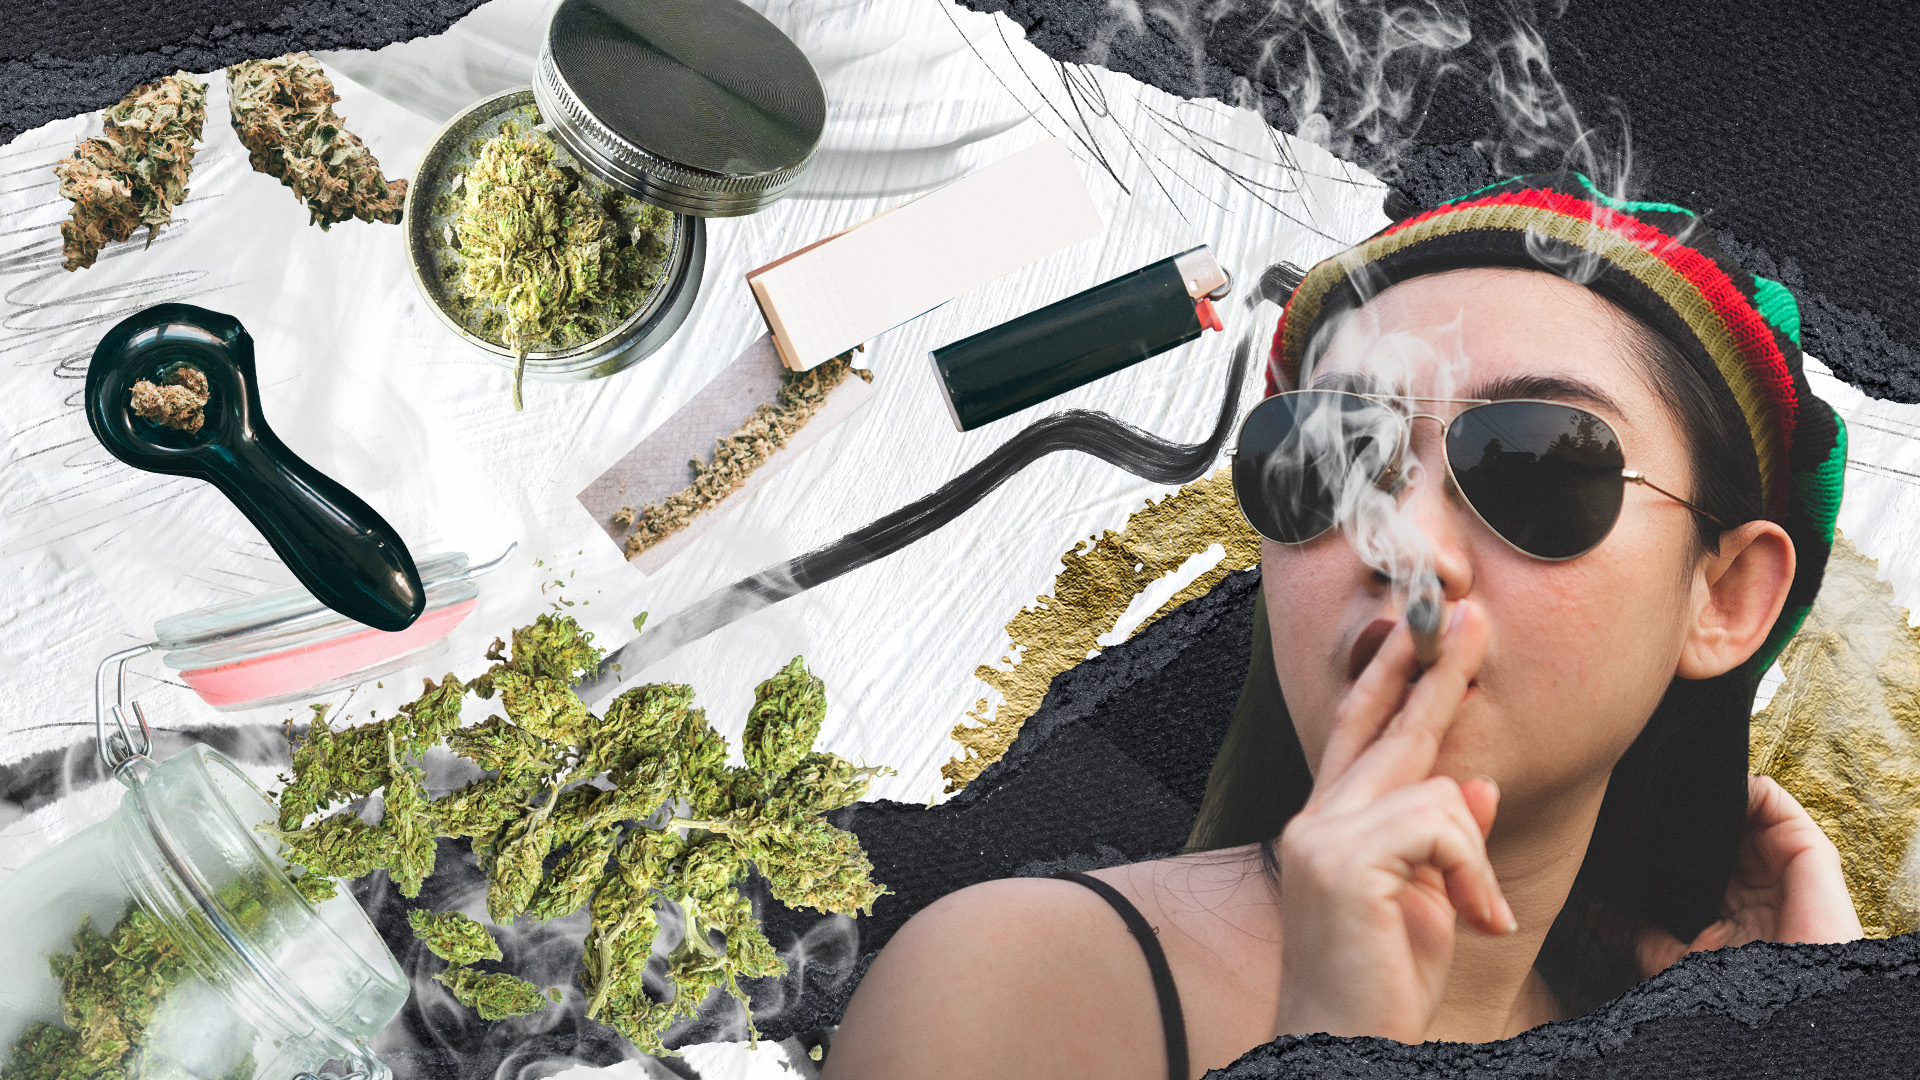 What To Expect The First Time You Smoke: Beginner’s Guide to Consuming Cannabis